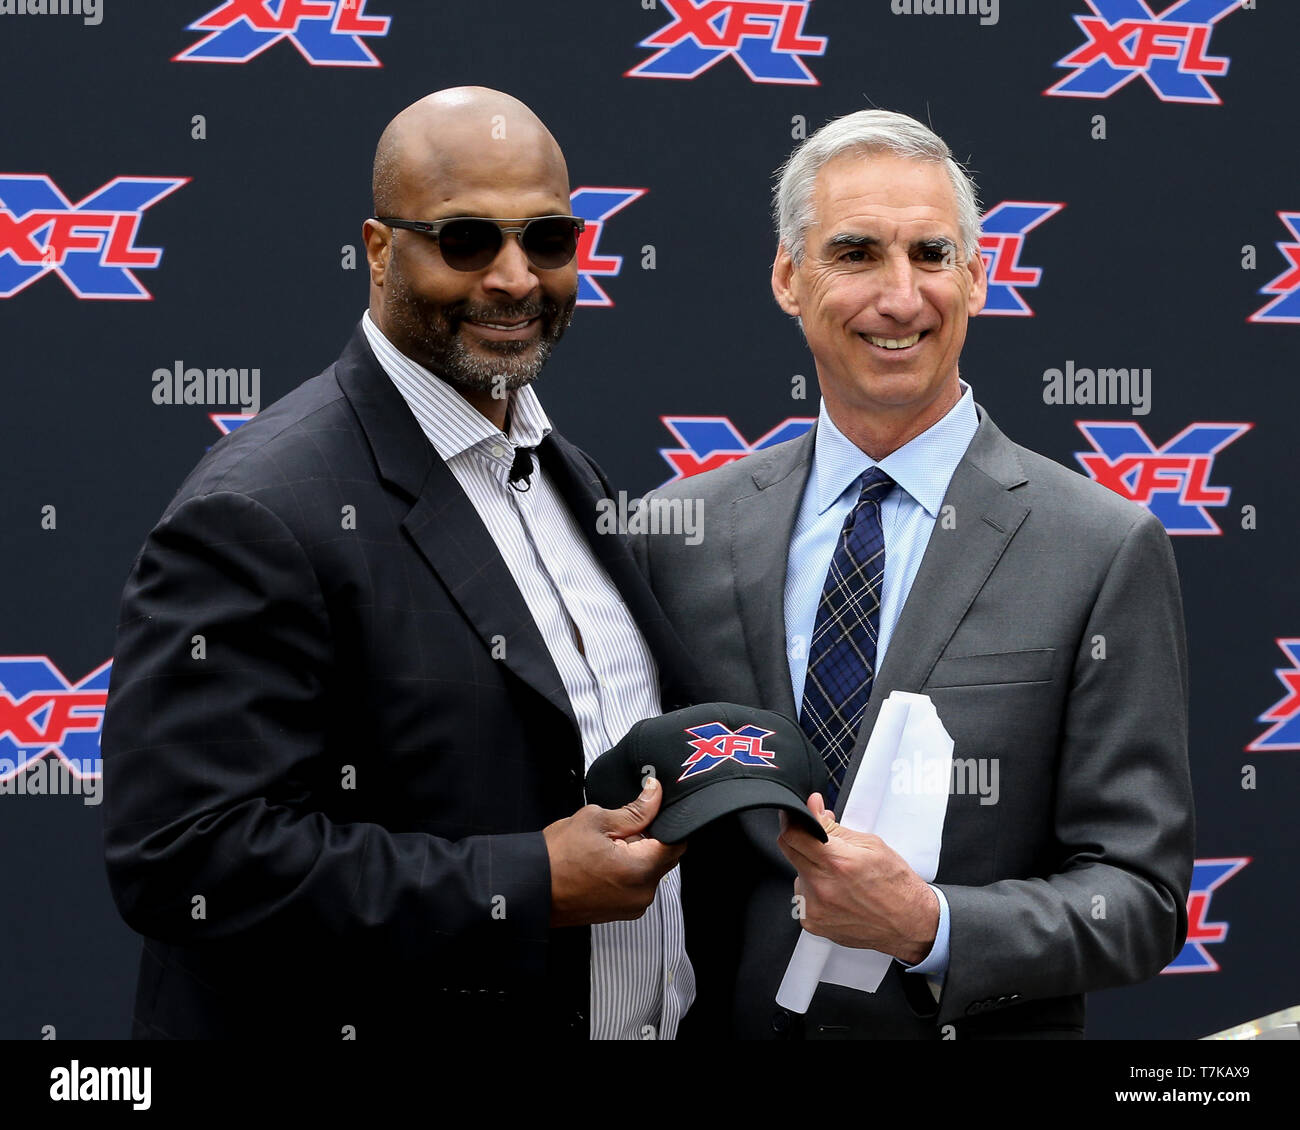 Winston Moss and Oliver Luck during press conference for XFL names Winston Moss Los Angeles Head Coach on May 7, 2019 (Photo by Jevone Moore) Stock Photo